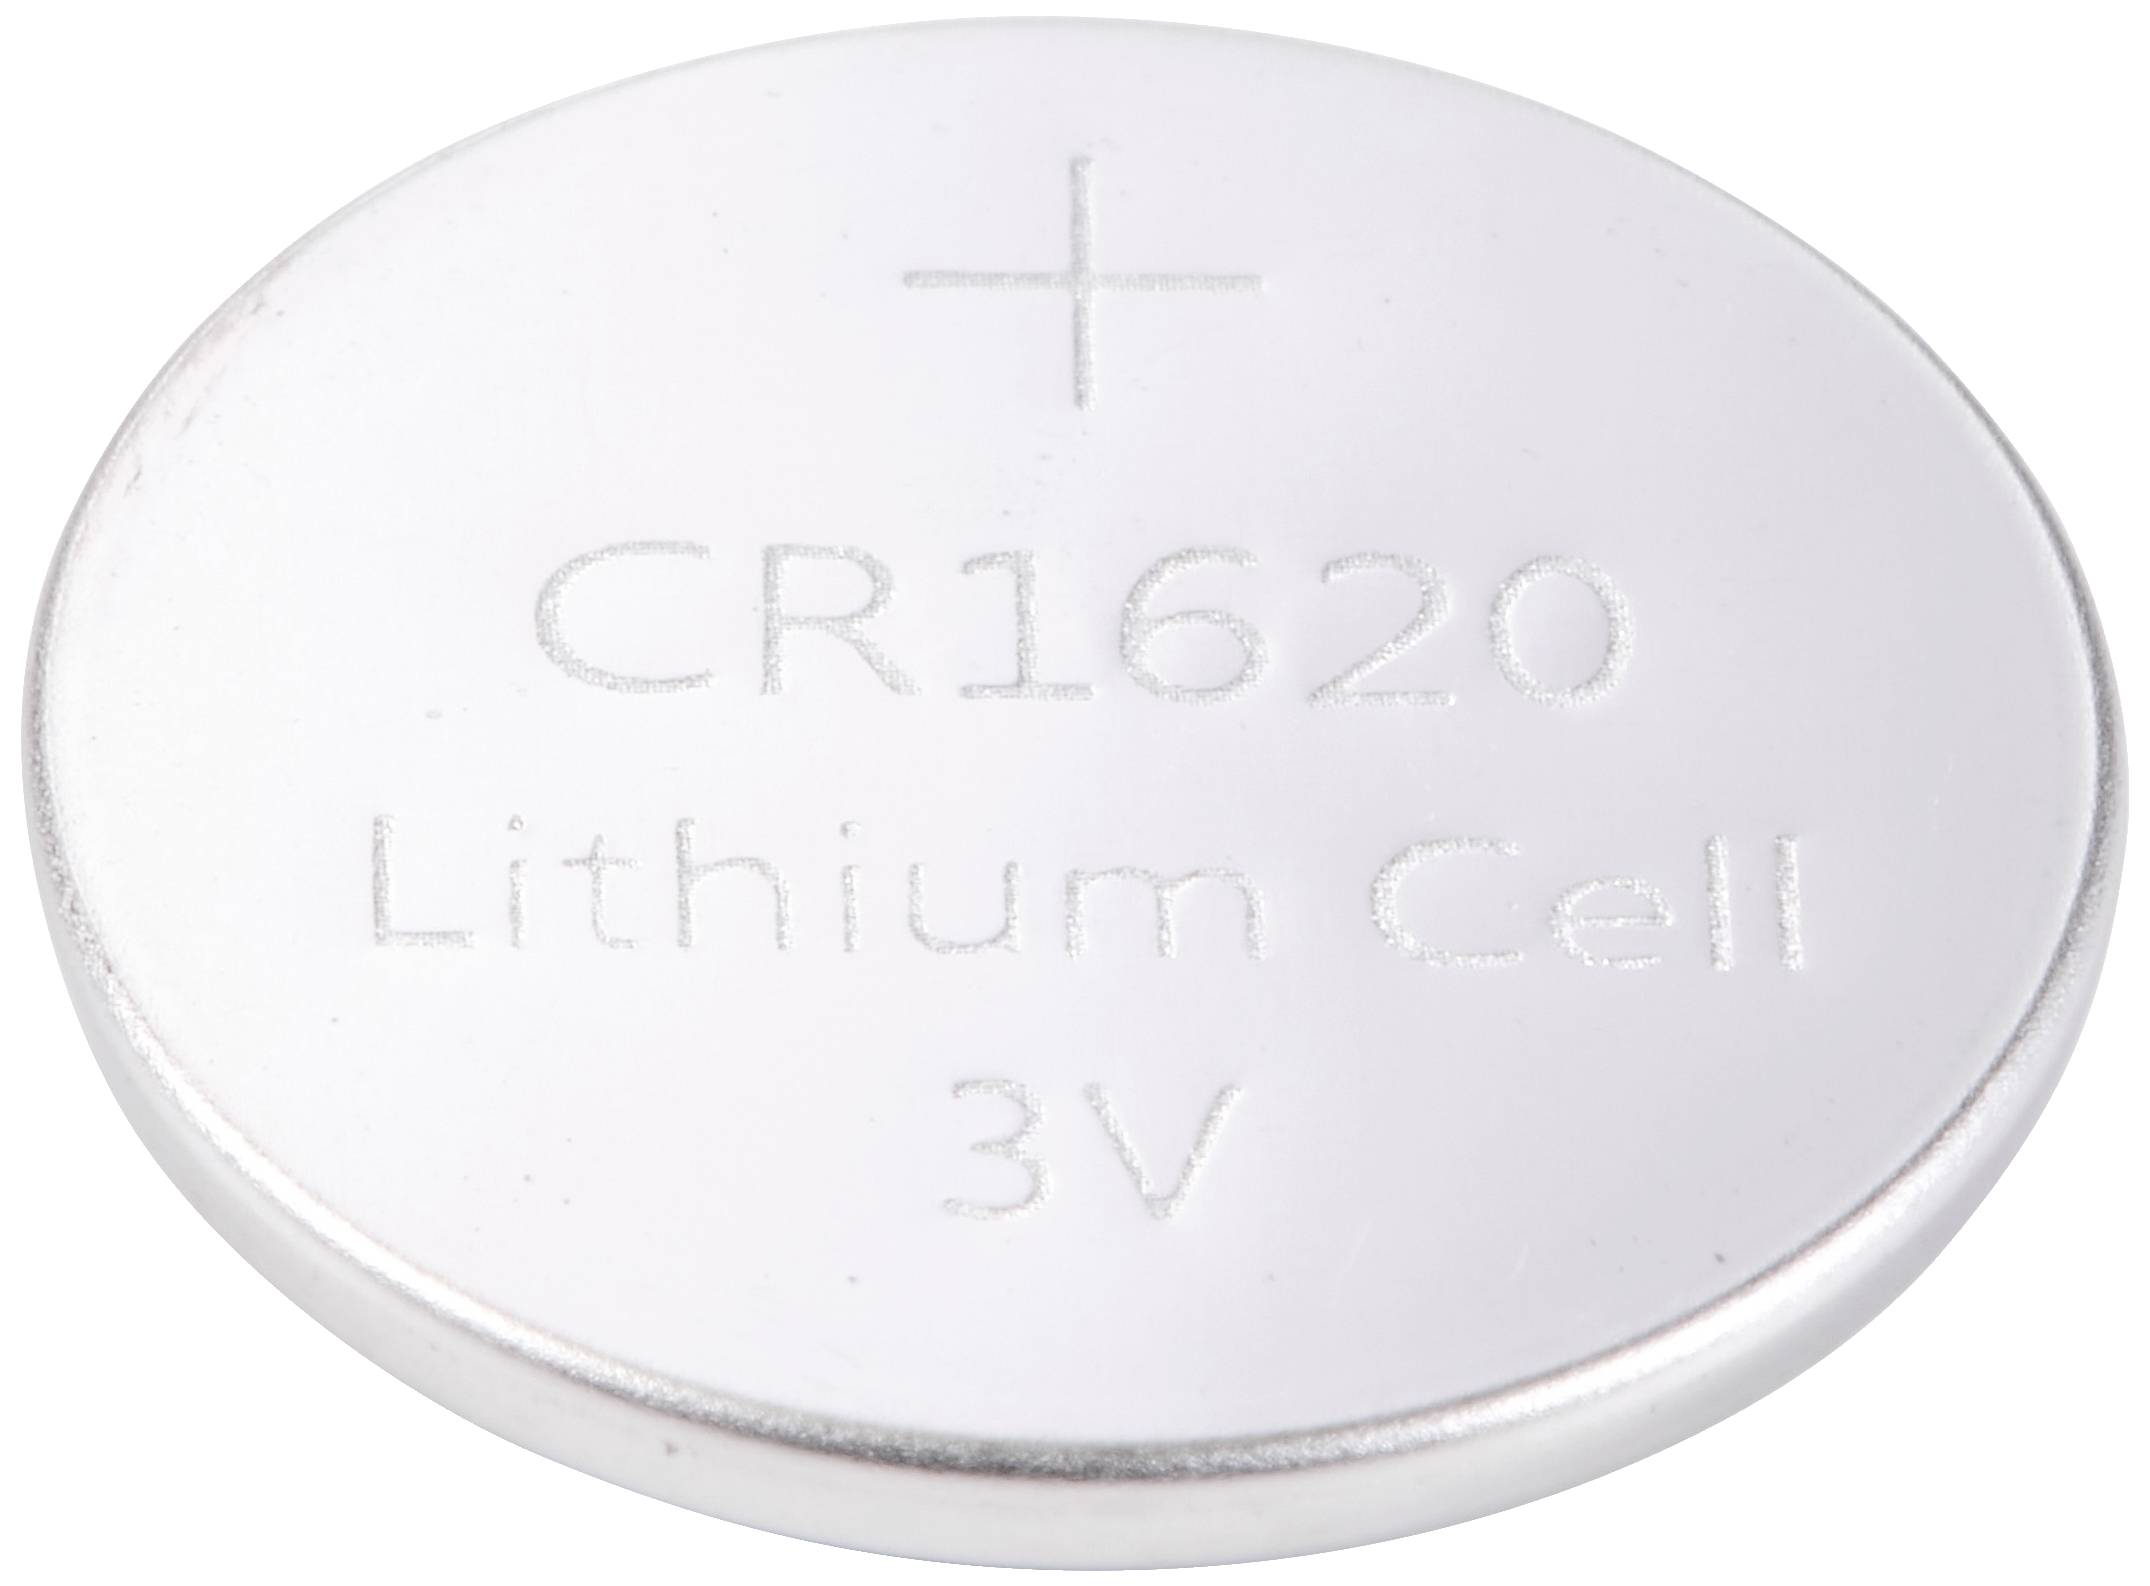 Buy VOLTCRAFT LM1620 Button cell CR 1620 Lithium 70 mAh 3 V 1 pc(s)